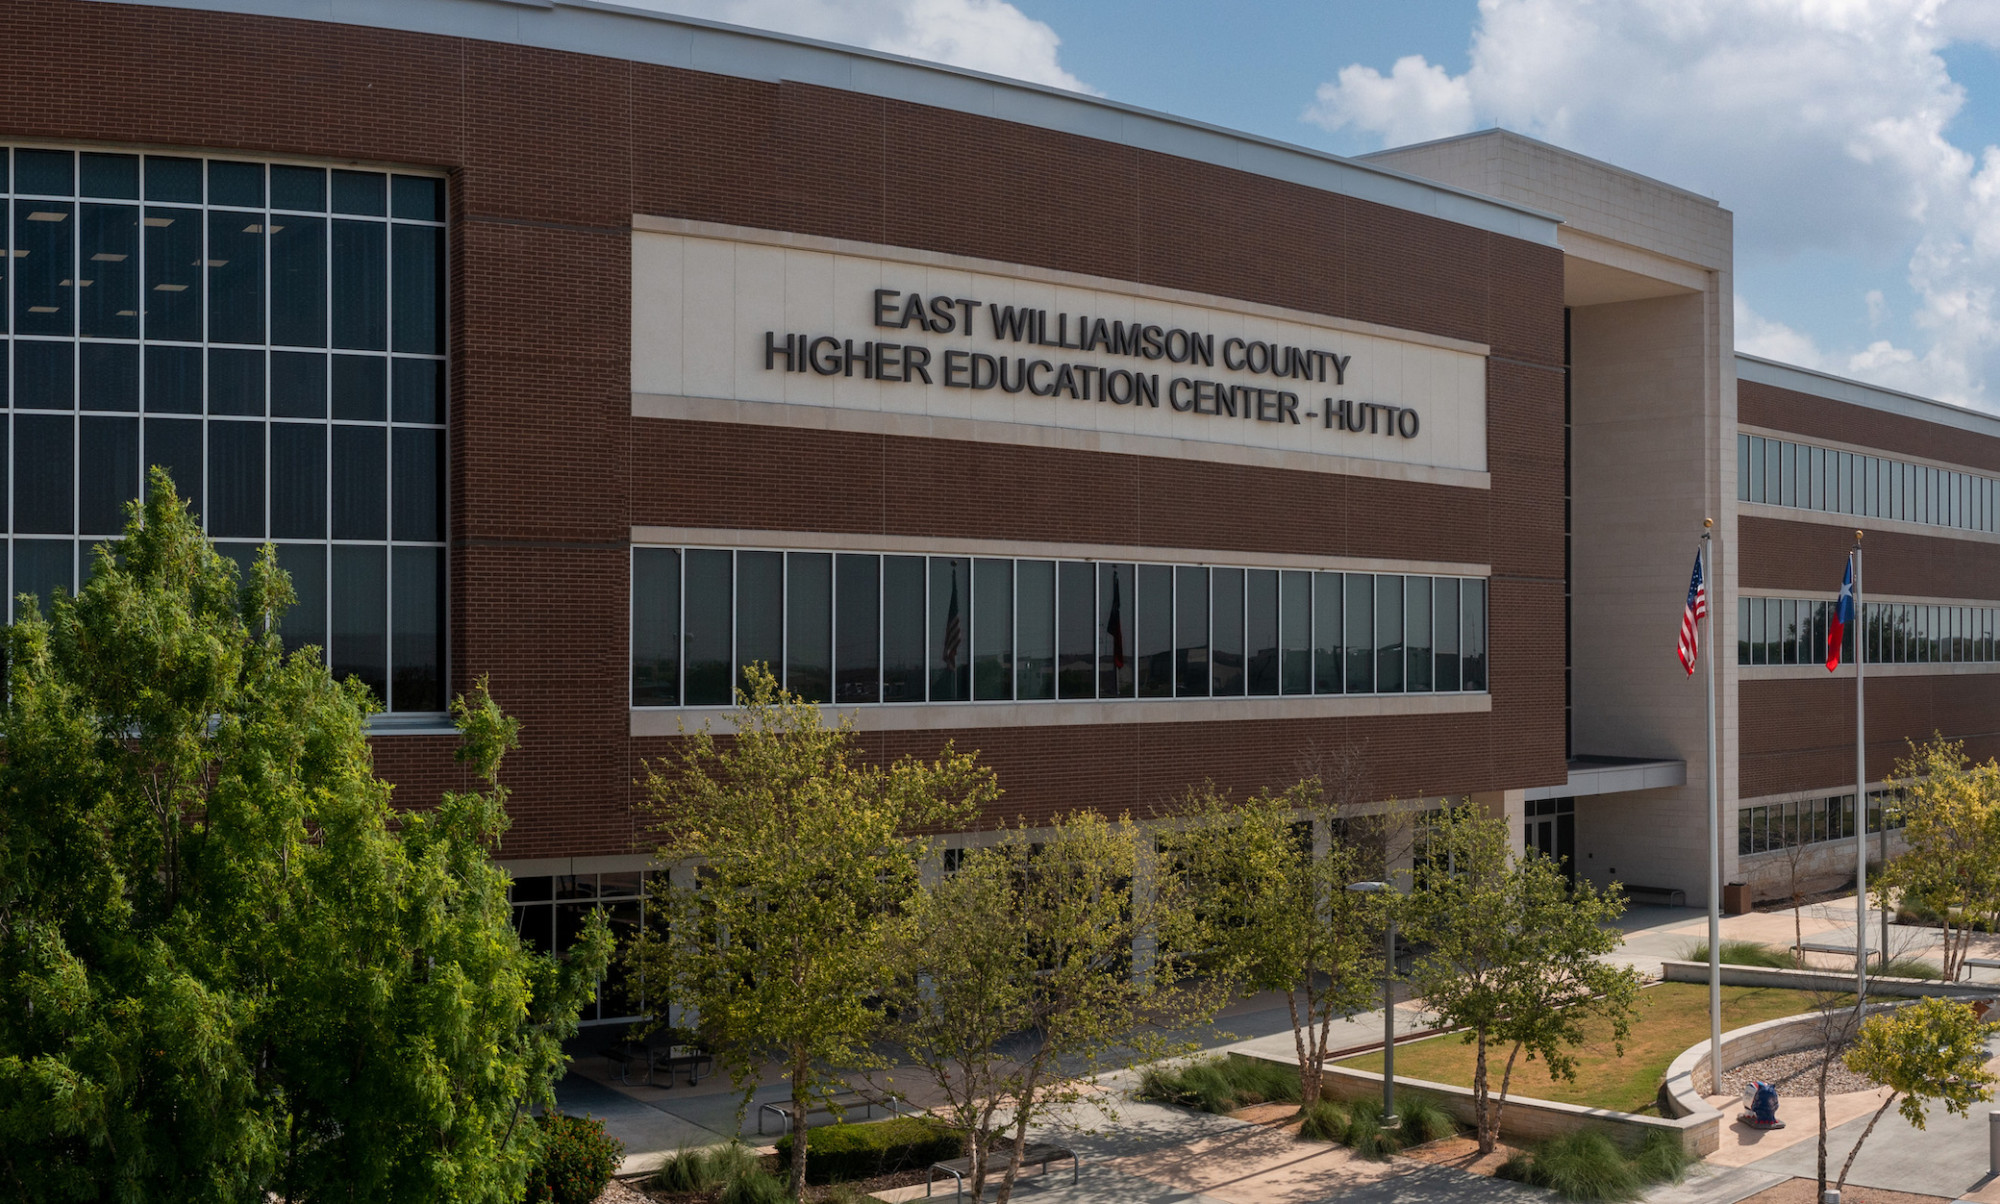 Photo of East Williamson County Higher Education Center - Hutto